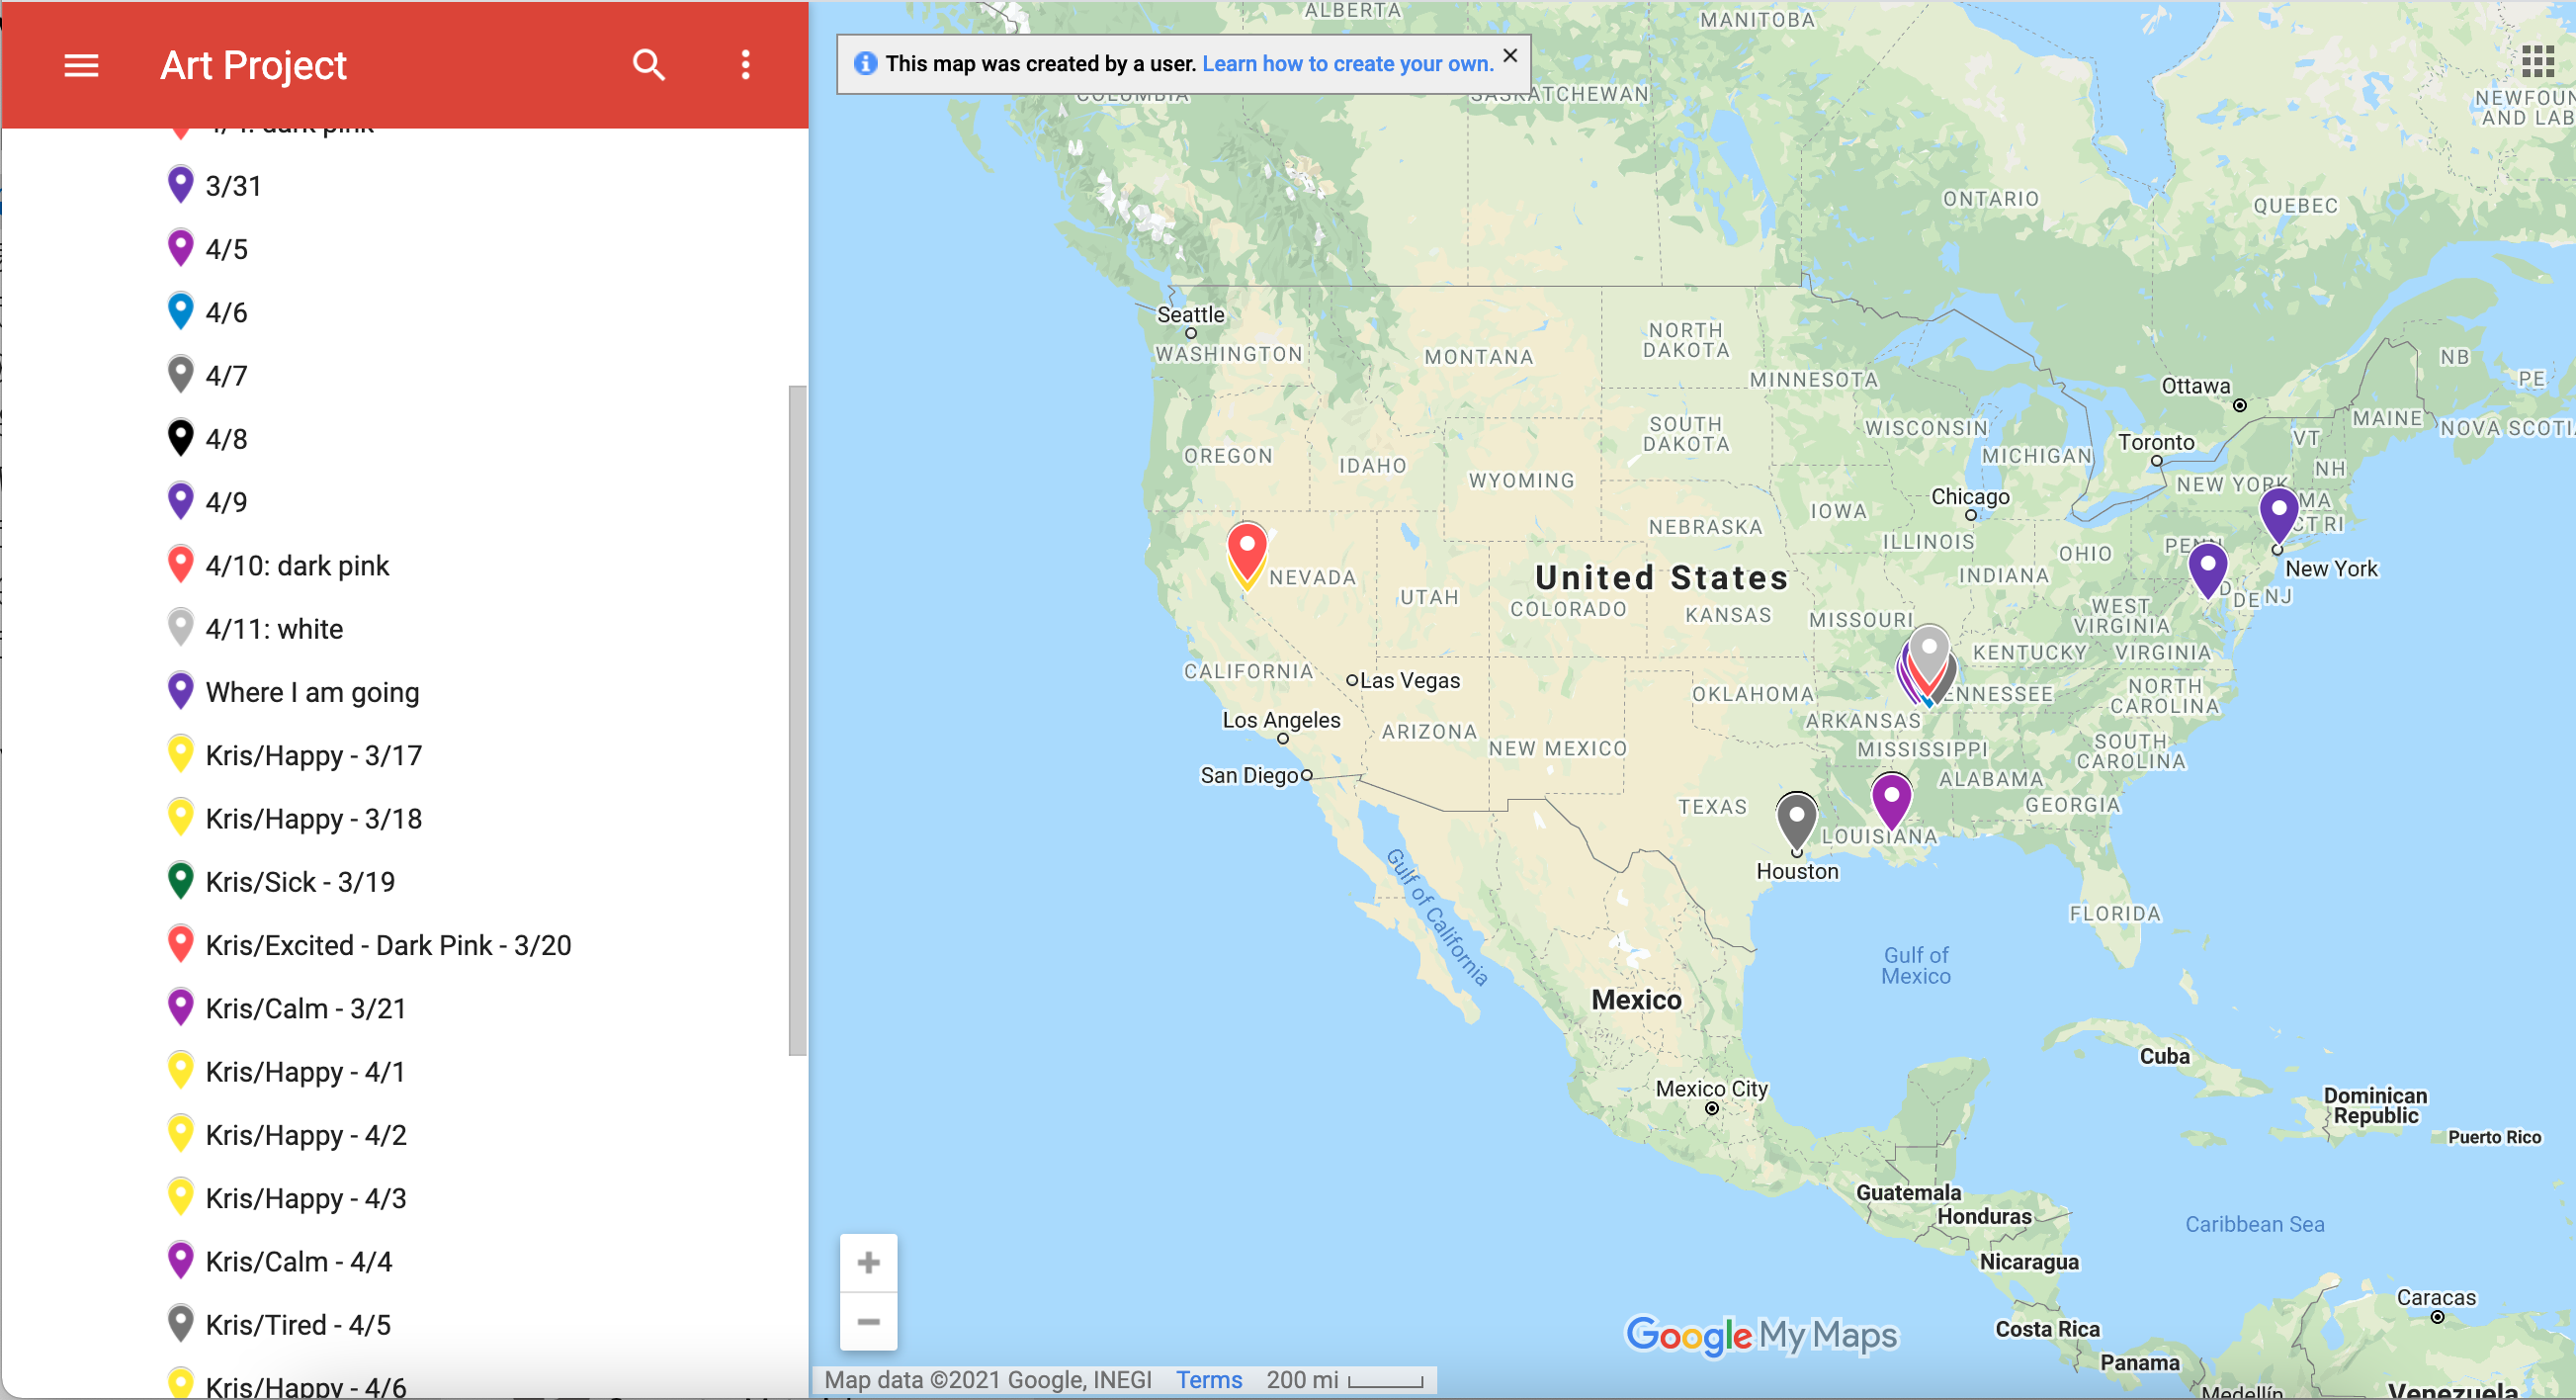 a Google map of the United States